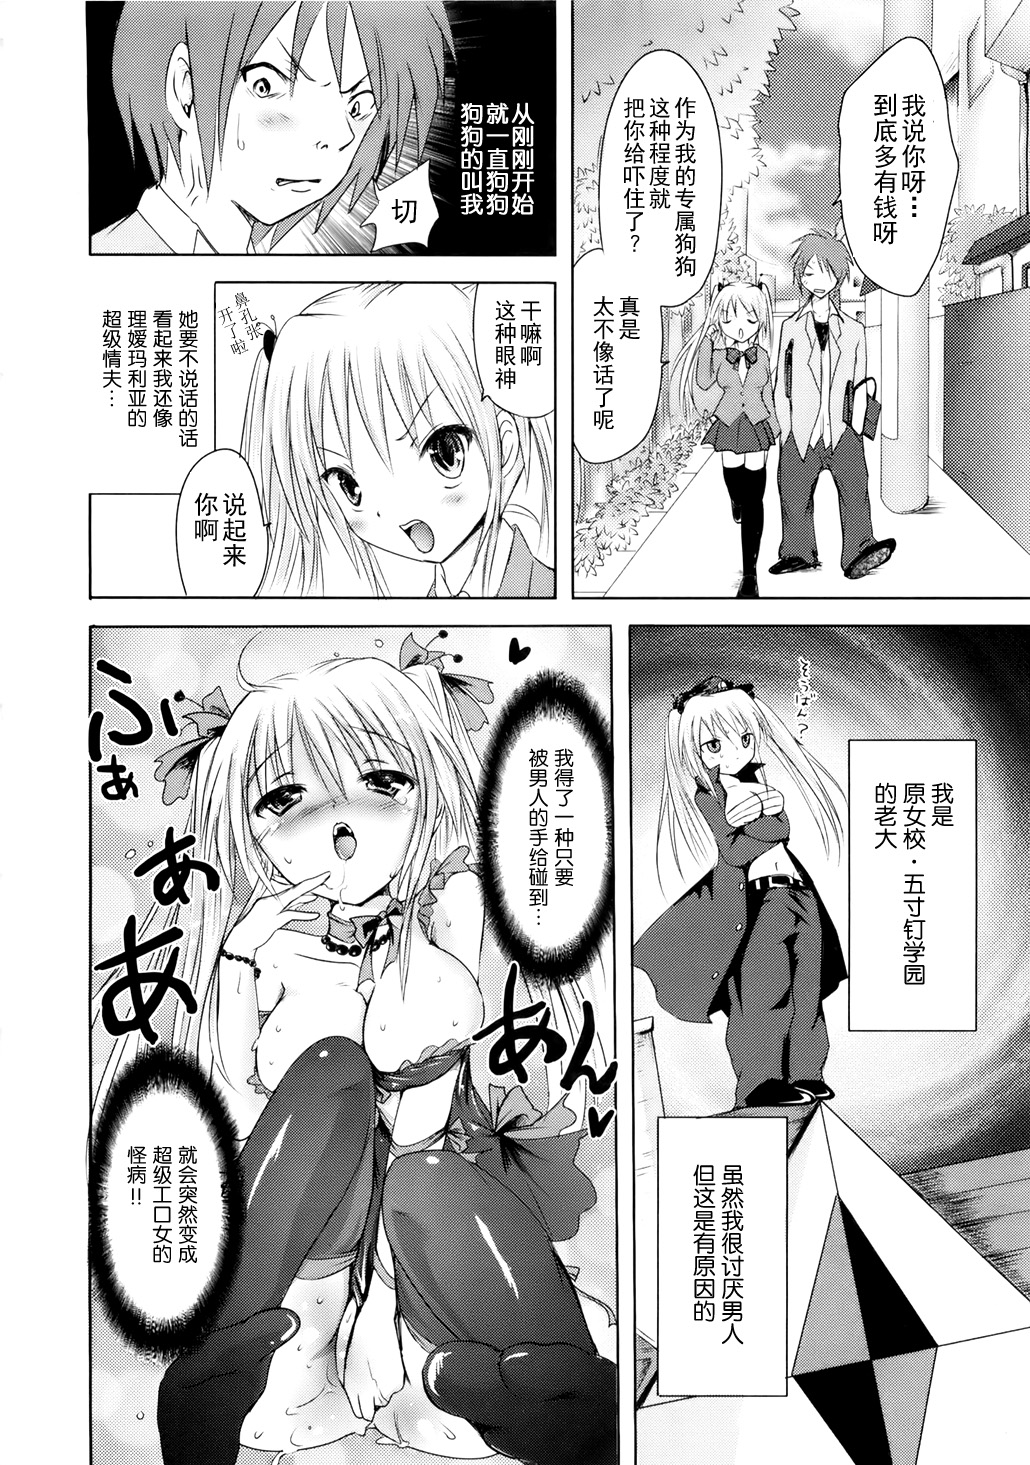 [Natsume Fumika] Sundere! Ch. 2 [Chinese] [夏目文花] スンデレ! 章2 [中文翻譯]